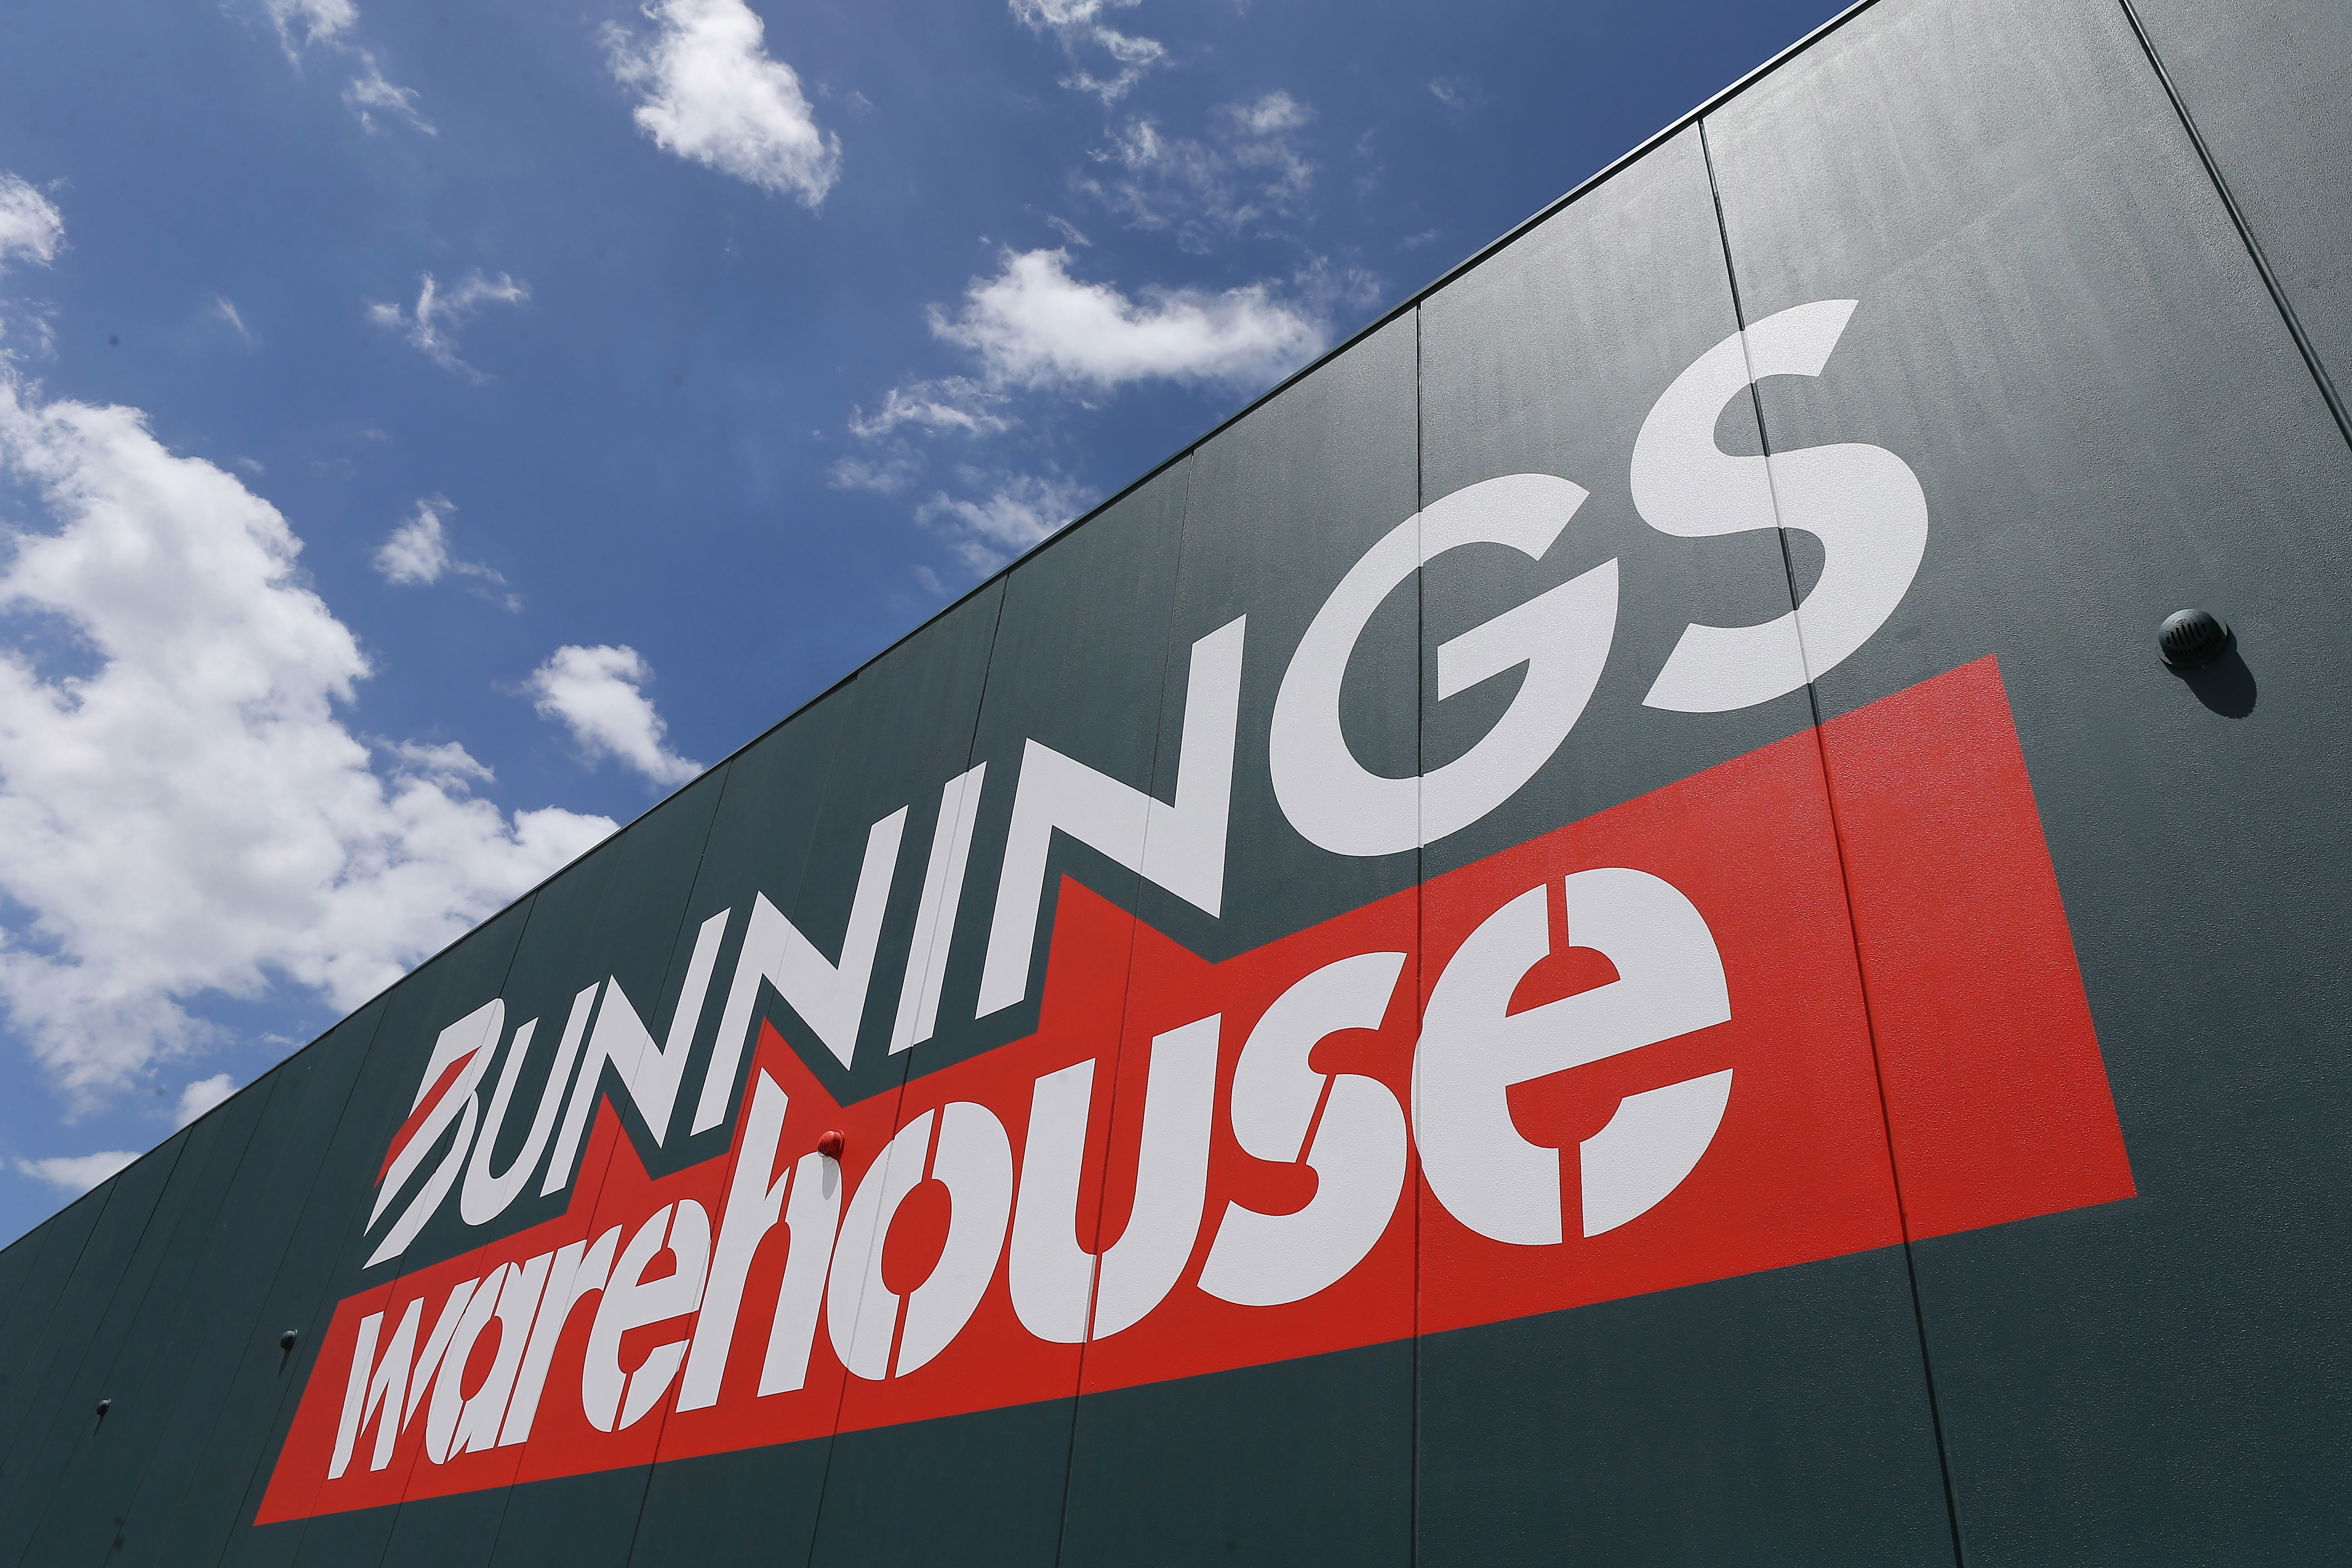 Staff are seen working in the timber yard of the Bunnings Altona warehouse on December 17, 2014 in Melbourne, Australia.